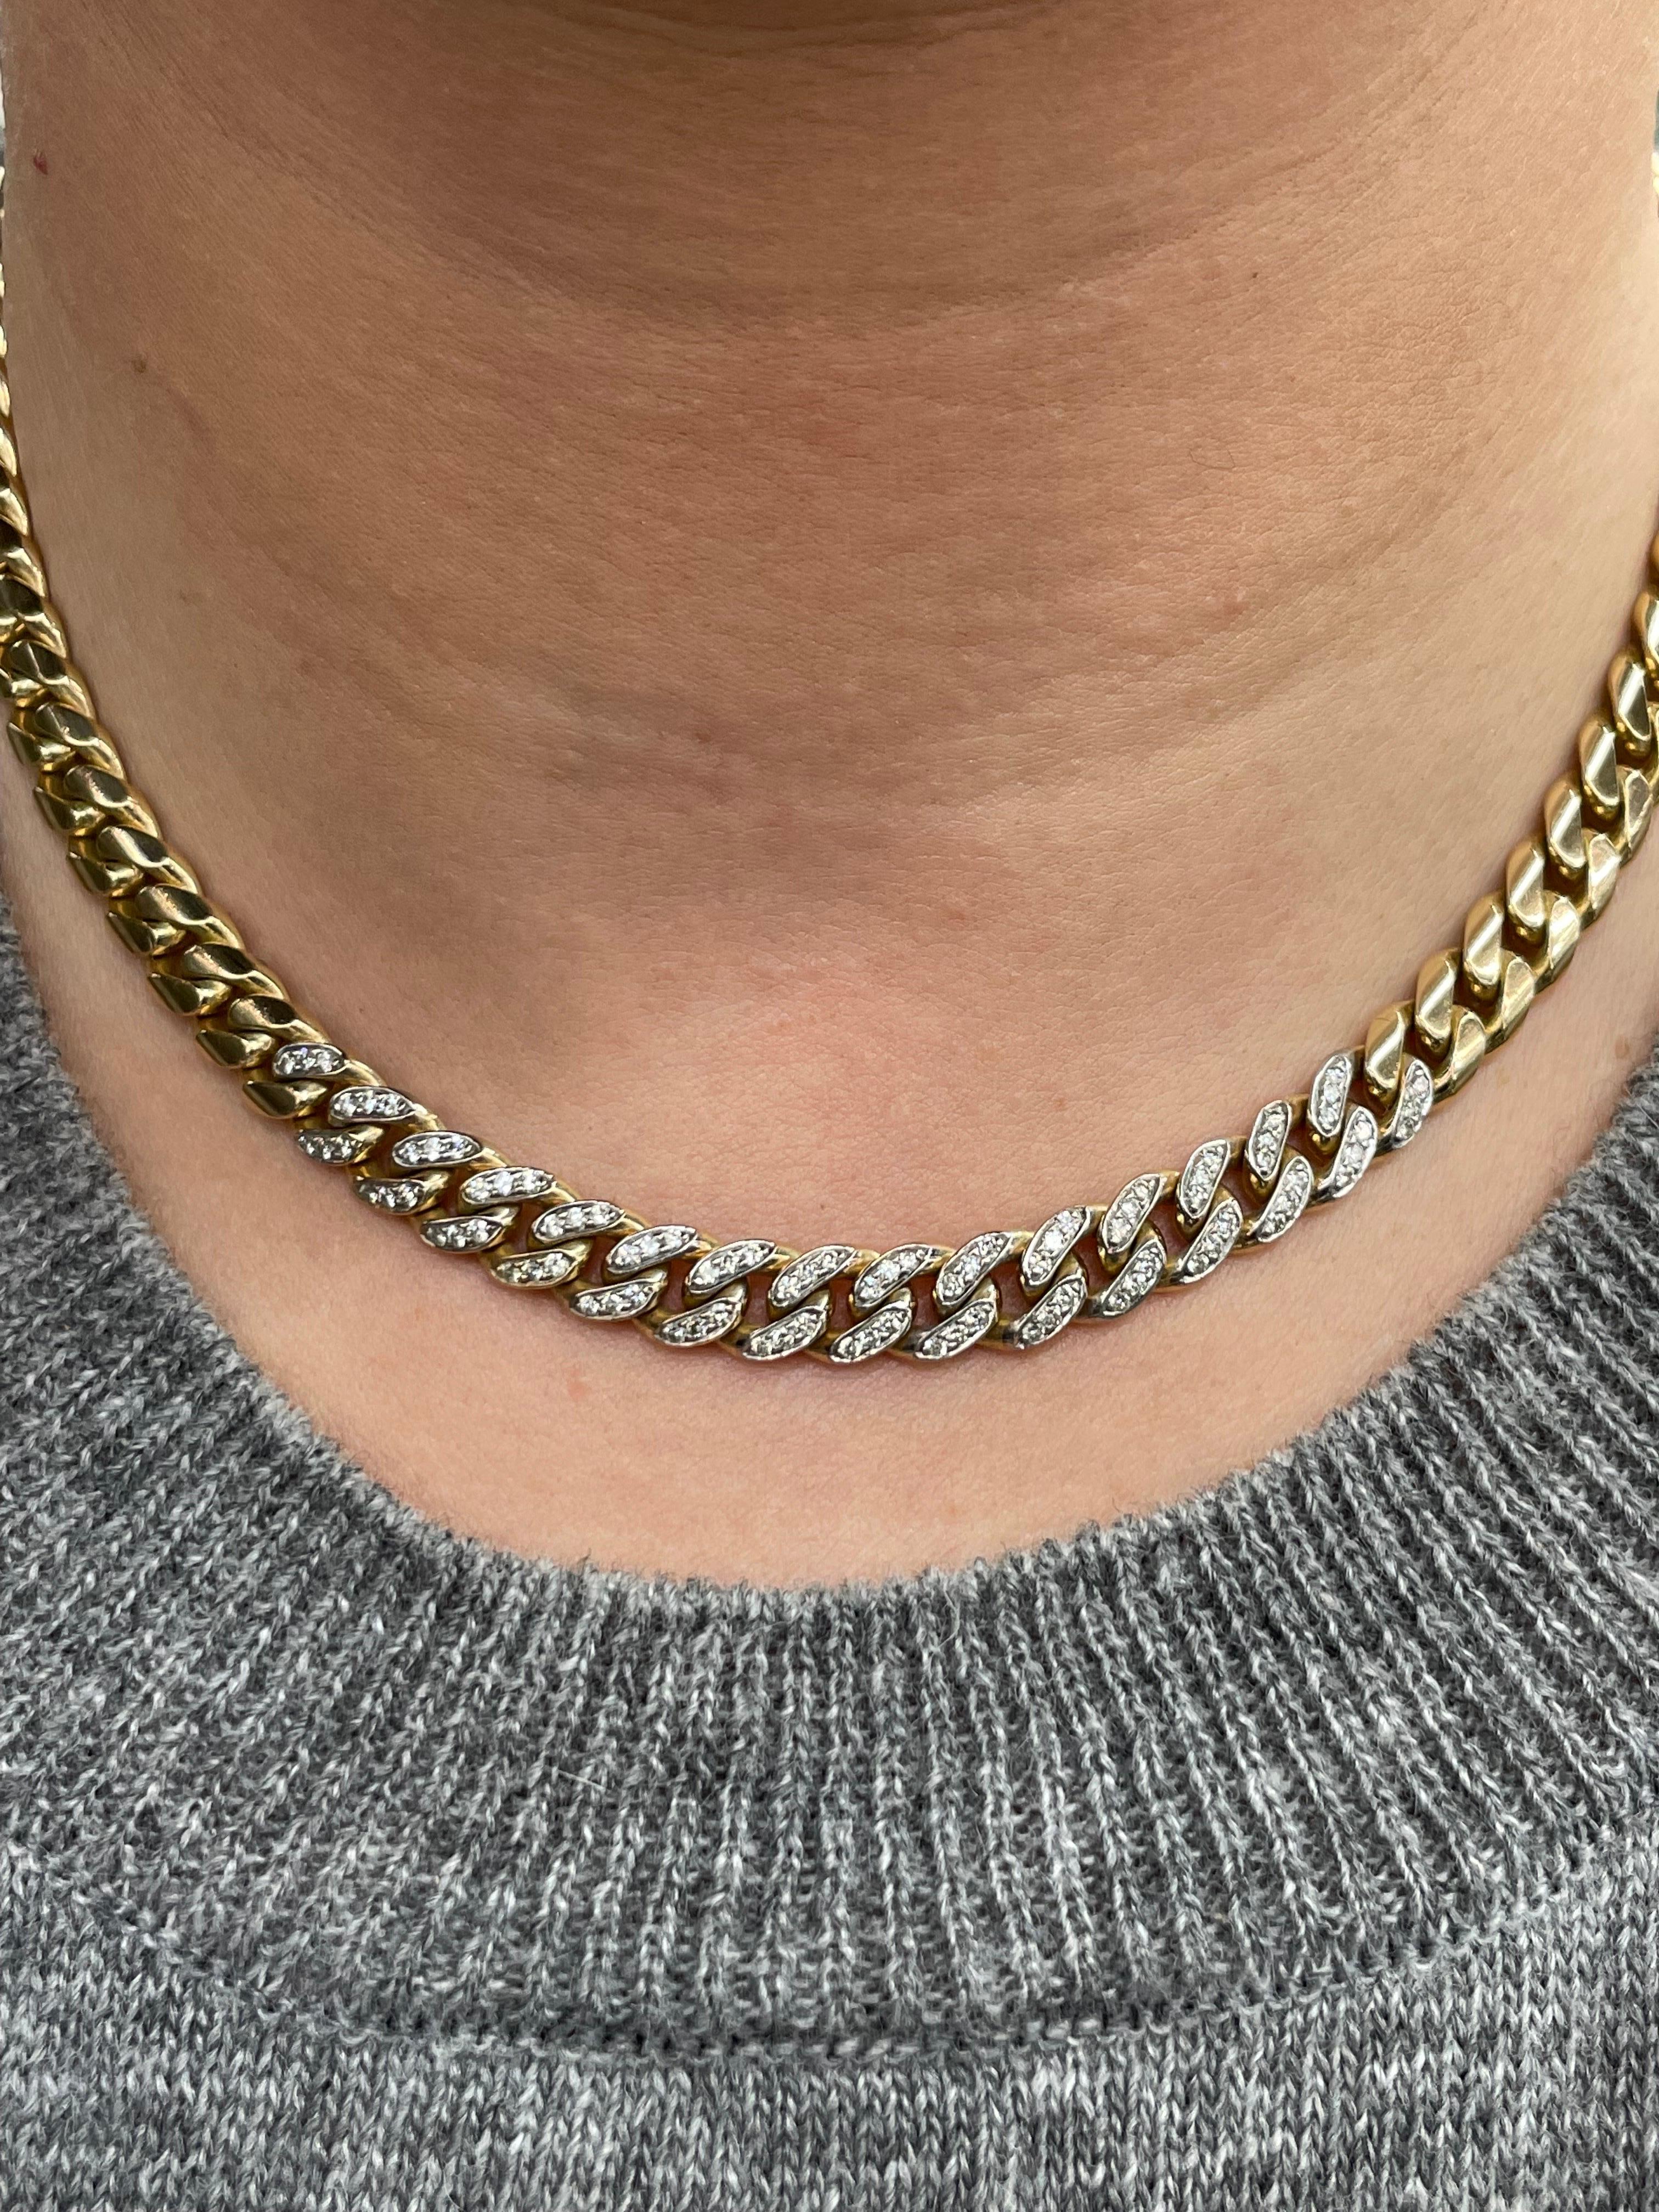 Two Way Diamond Cuban Link Choker Necklace 18 Karat Yellow Gold 75.4 Grams In Excellent Condition For Sale In New York, NY